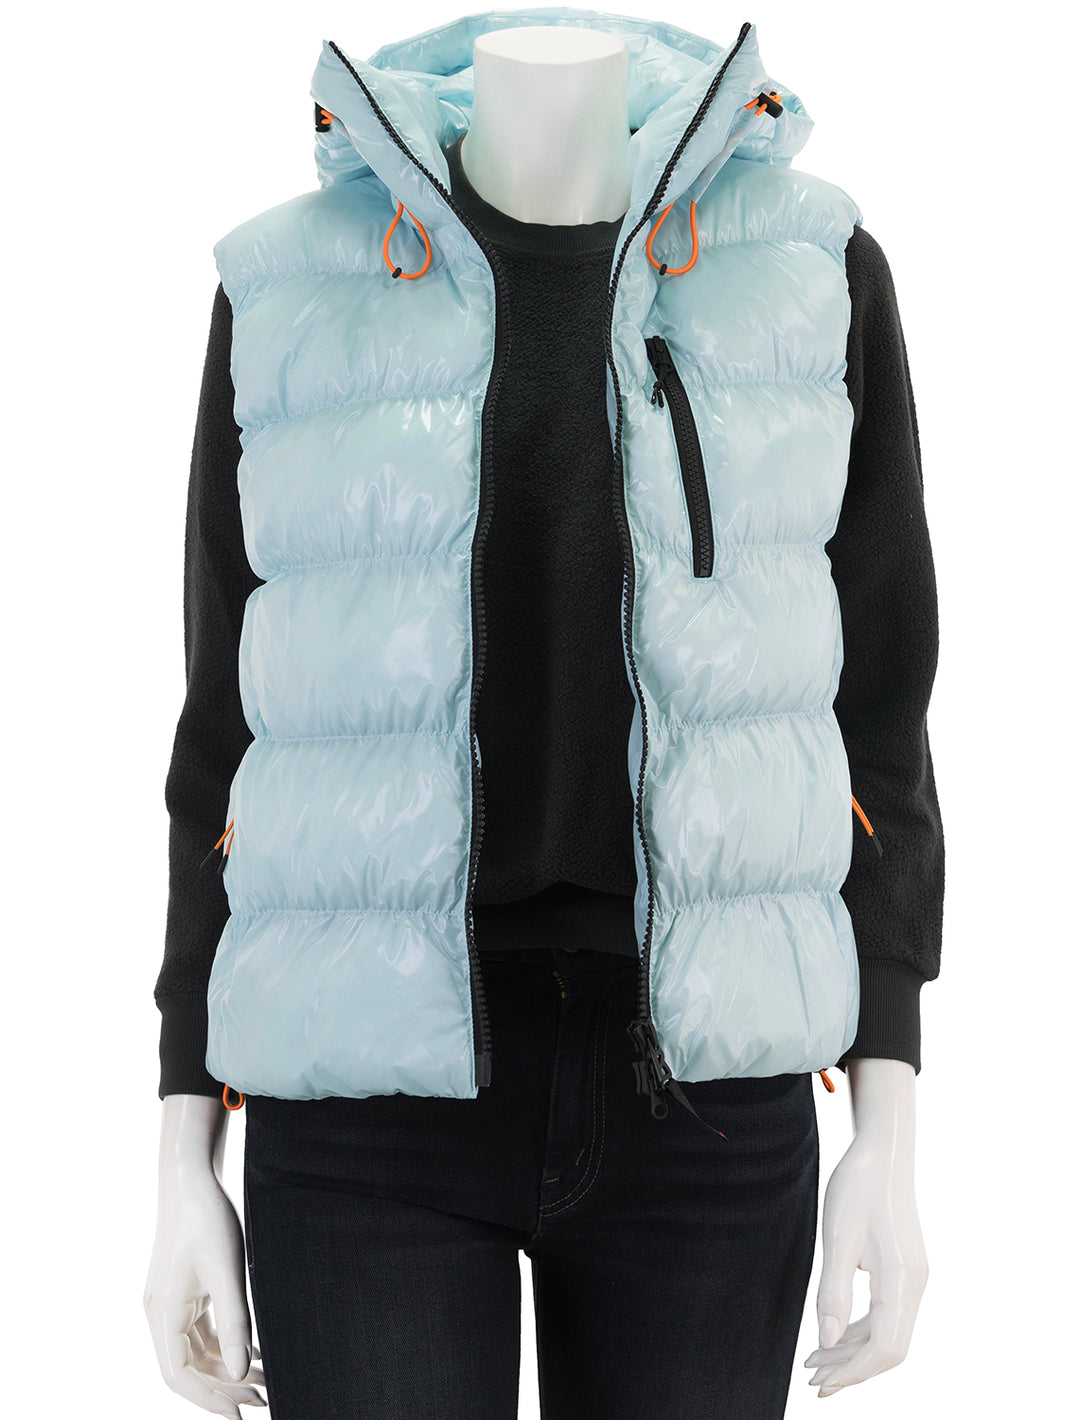 Front view of Bogner Fire + Ice's naima vest in pale blue, unzipped.